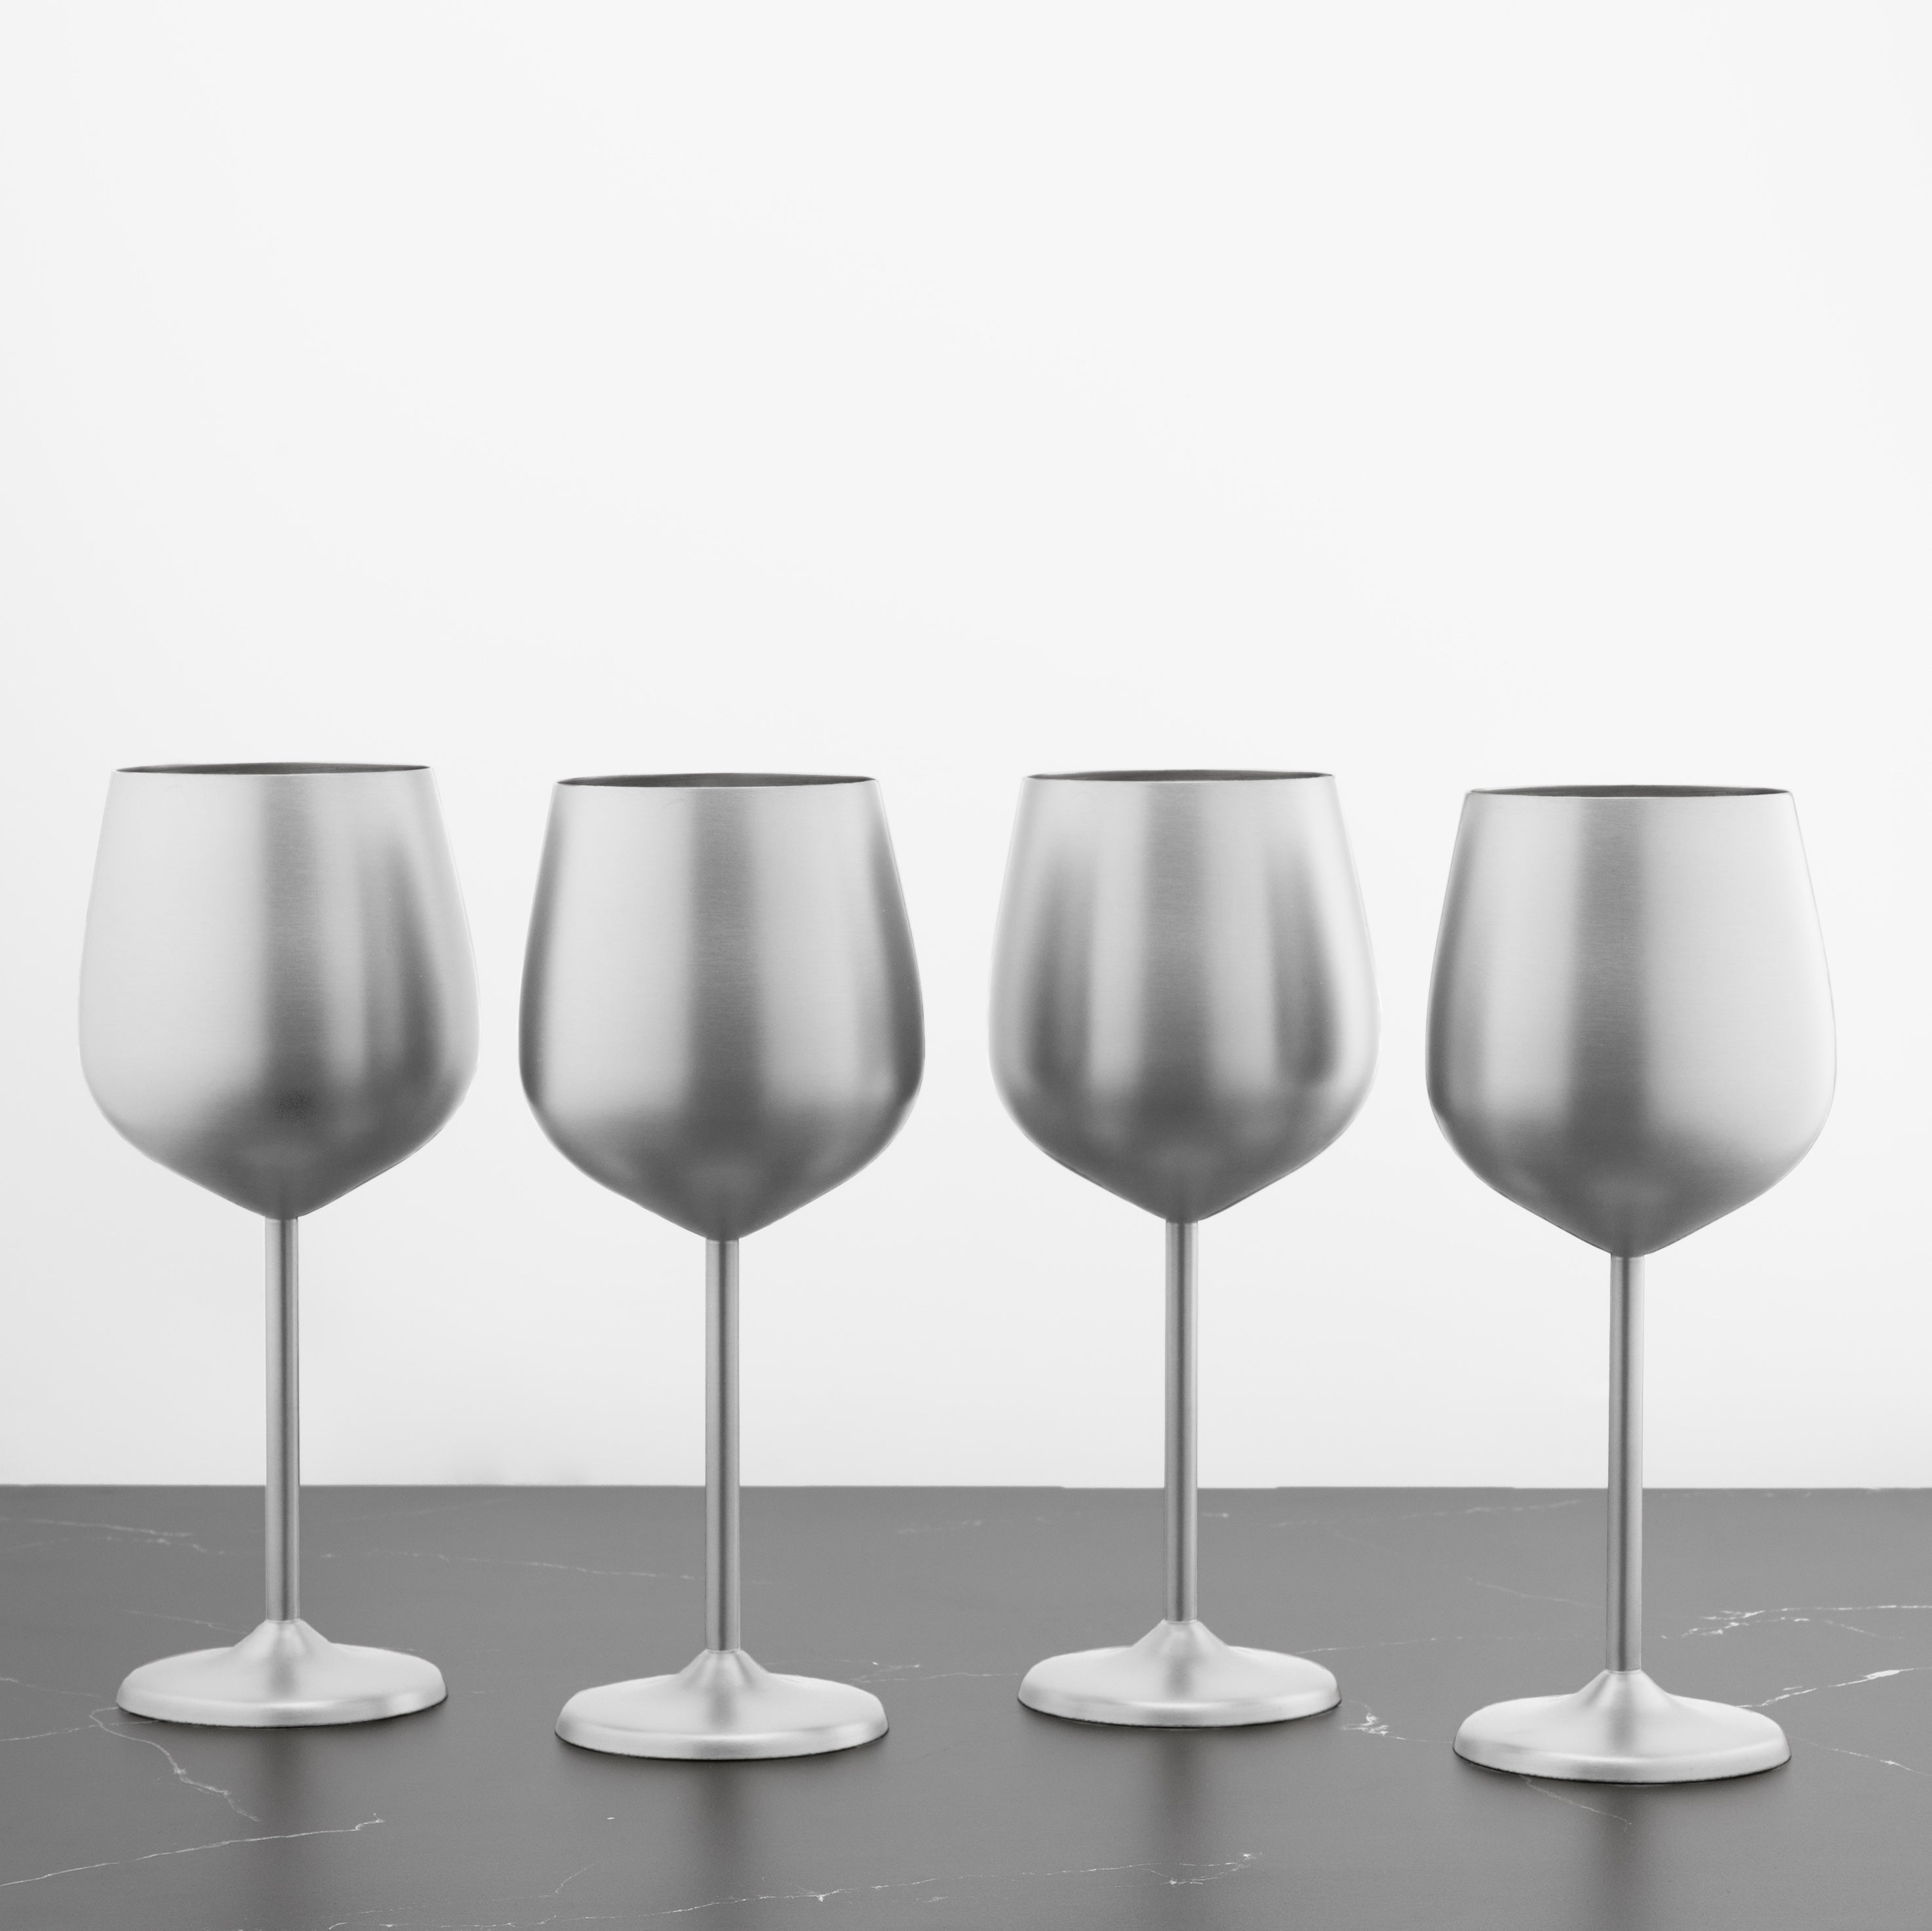 Cambridge 18 oz Stainless Steel White Wine Glasses, Set of 4 - Silver